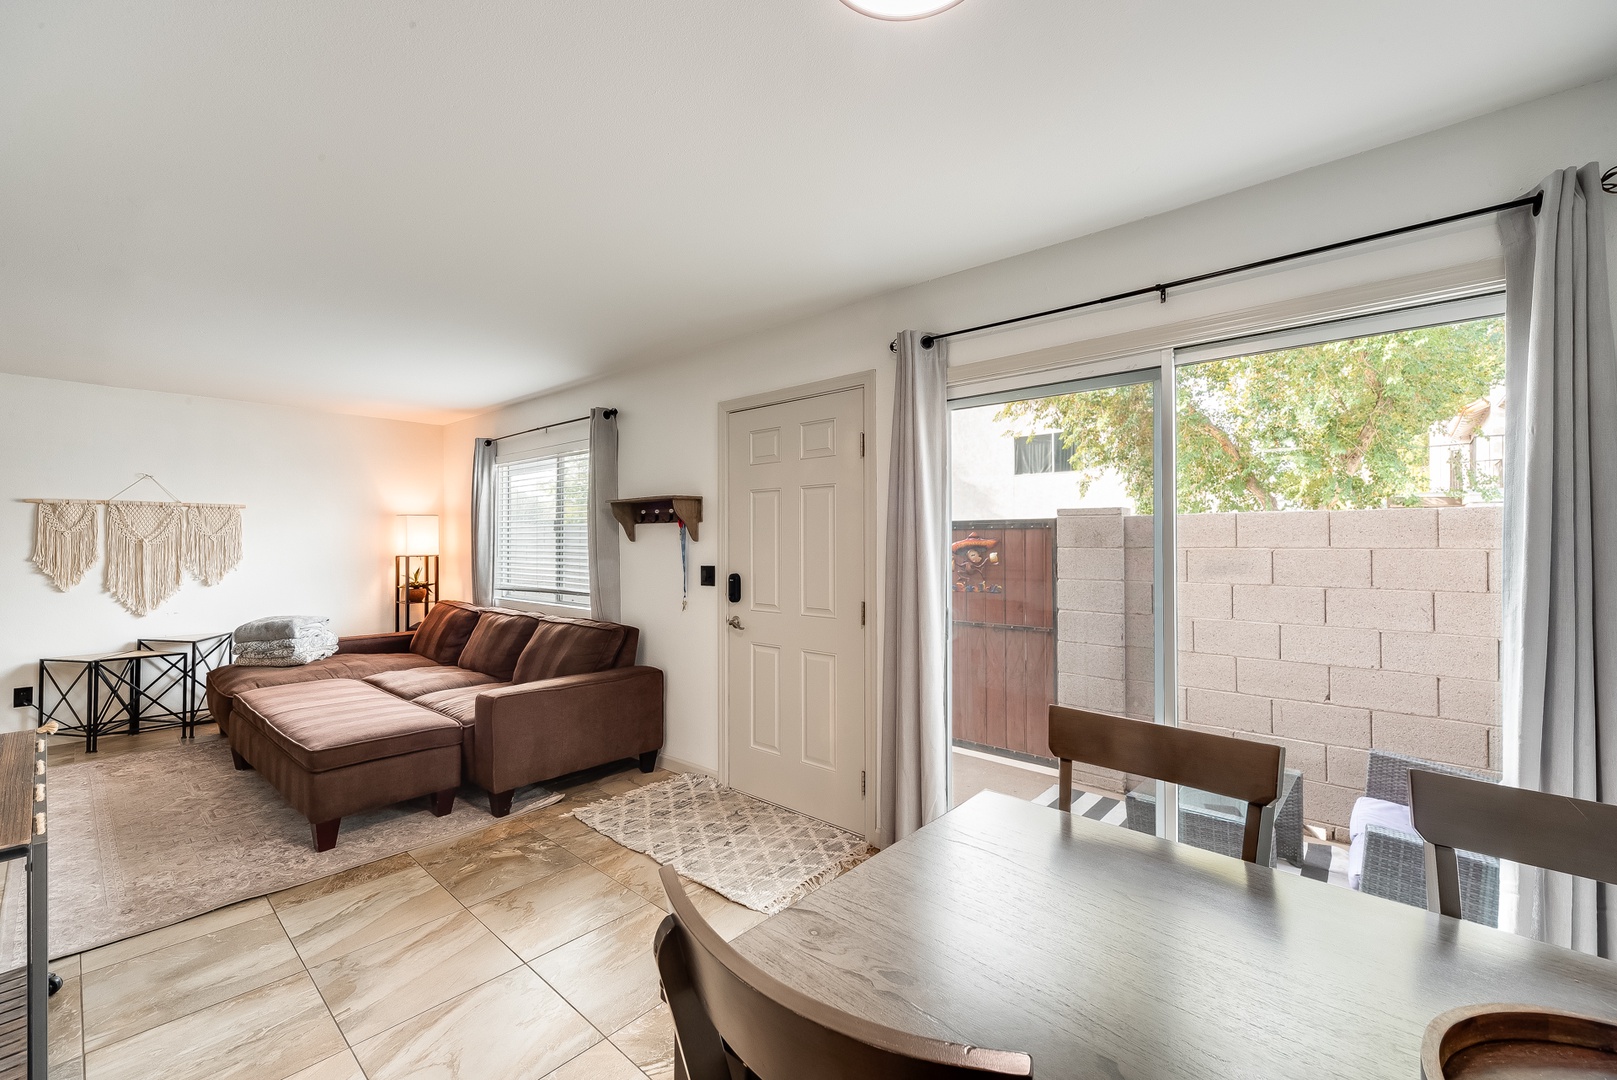 Scottsdale Vacation Rentals, Stay at the Roosevelt - Enjoy this newly renovated two-bedroom and 1.5-bath townhouse for your next vacation